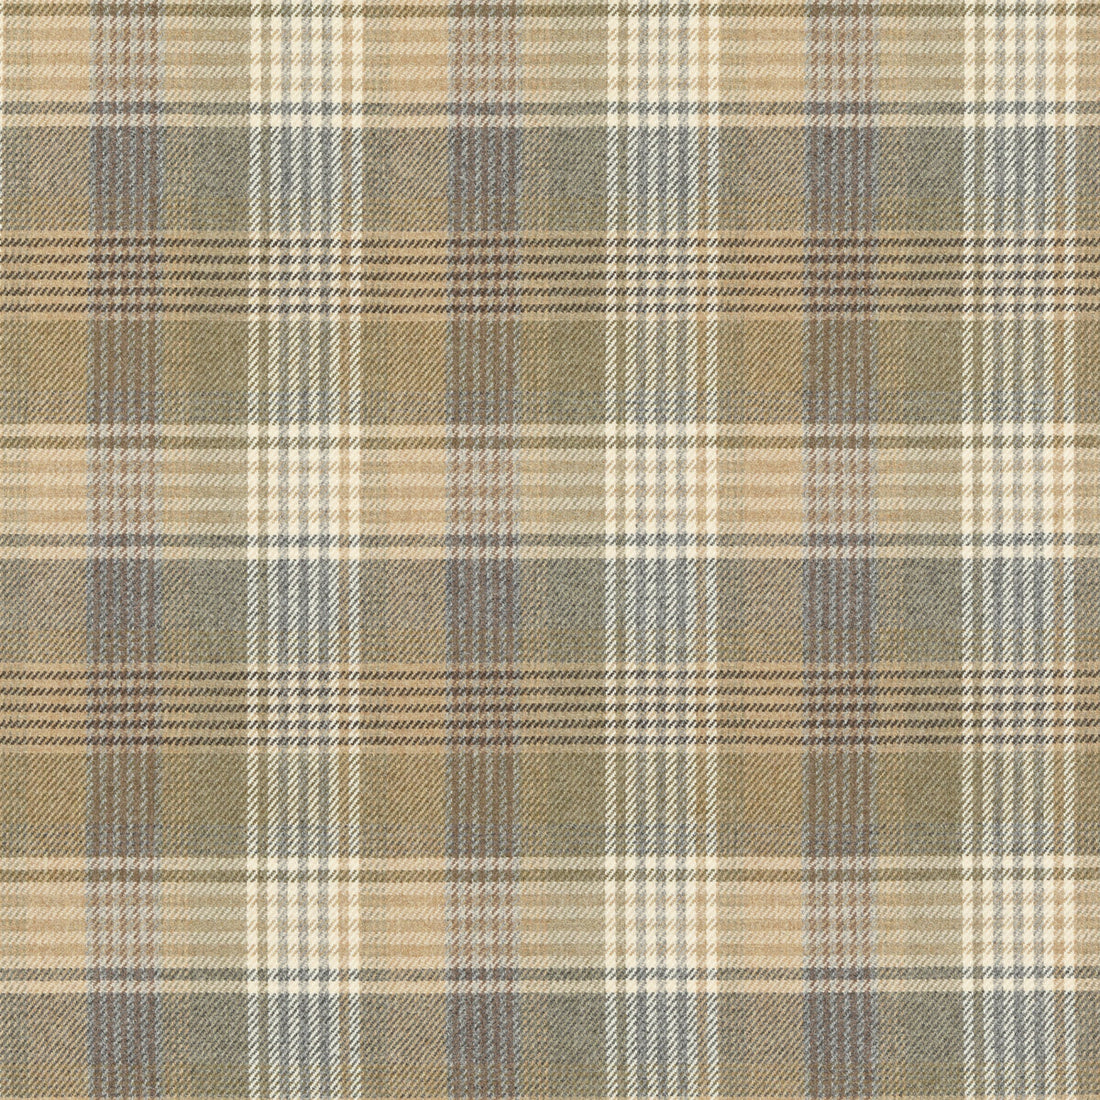 Braemar fabric in fawn color - pattern FD803.L13.0 - by Mulberry in the Mulberry Wools IV collection